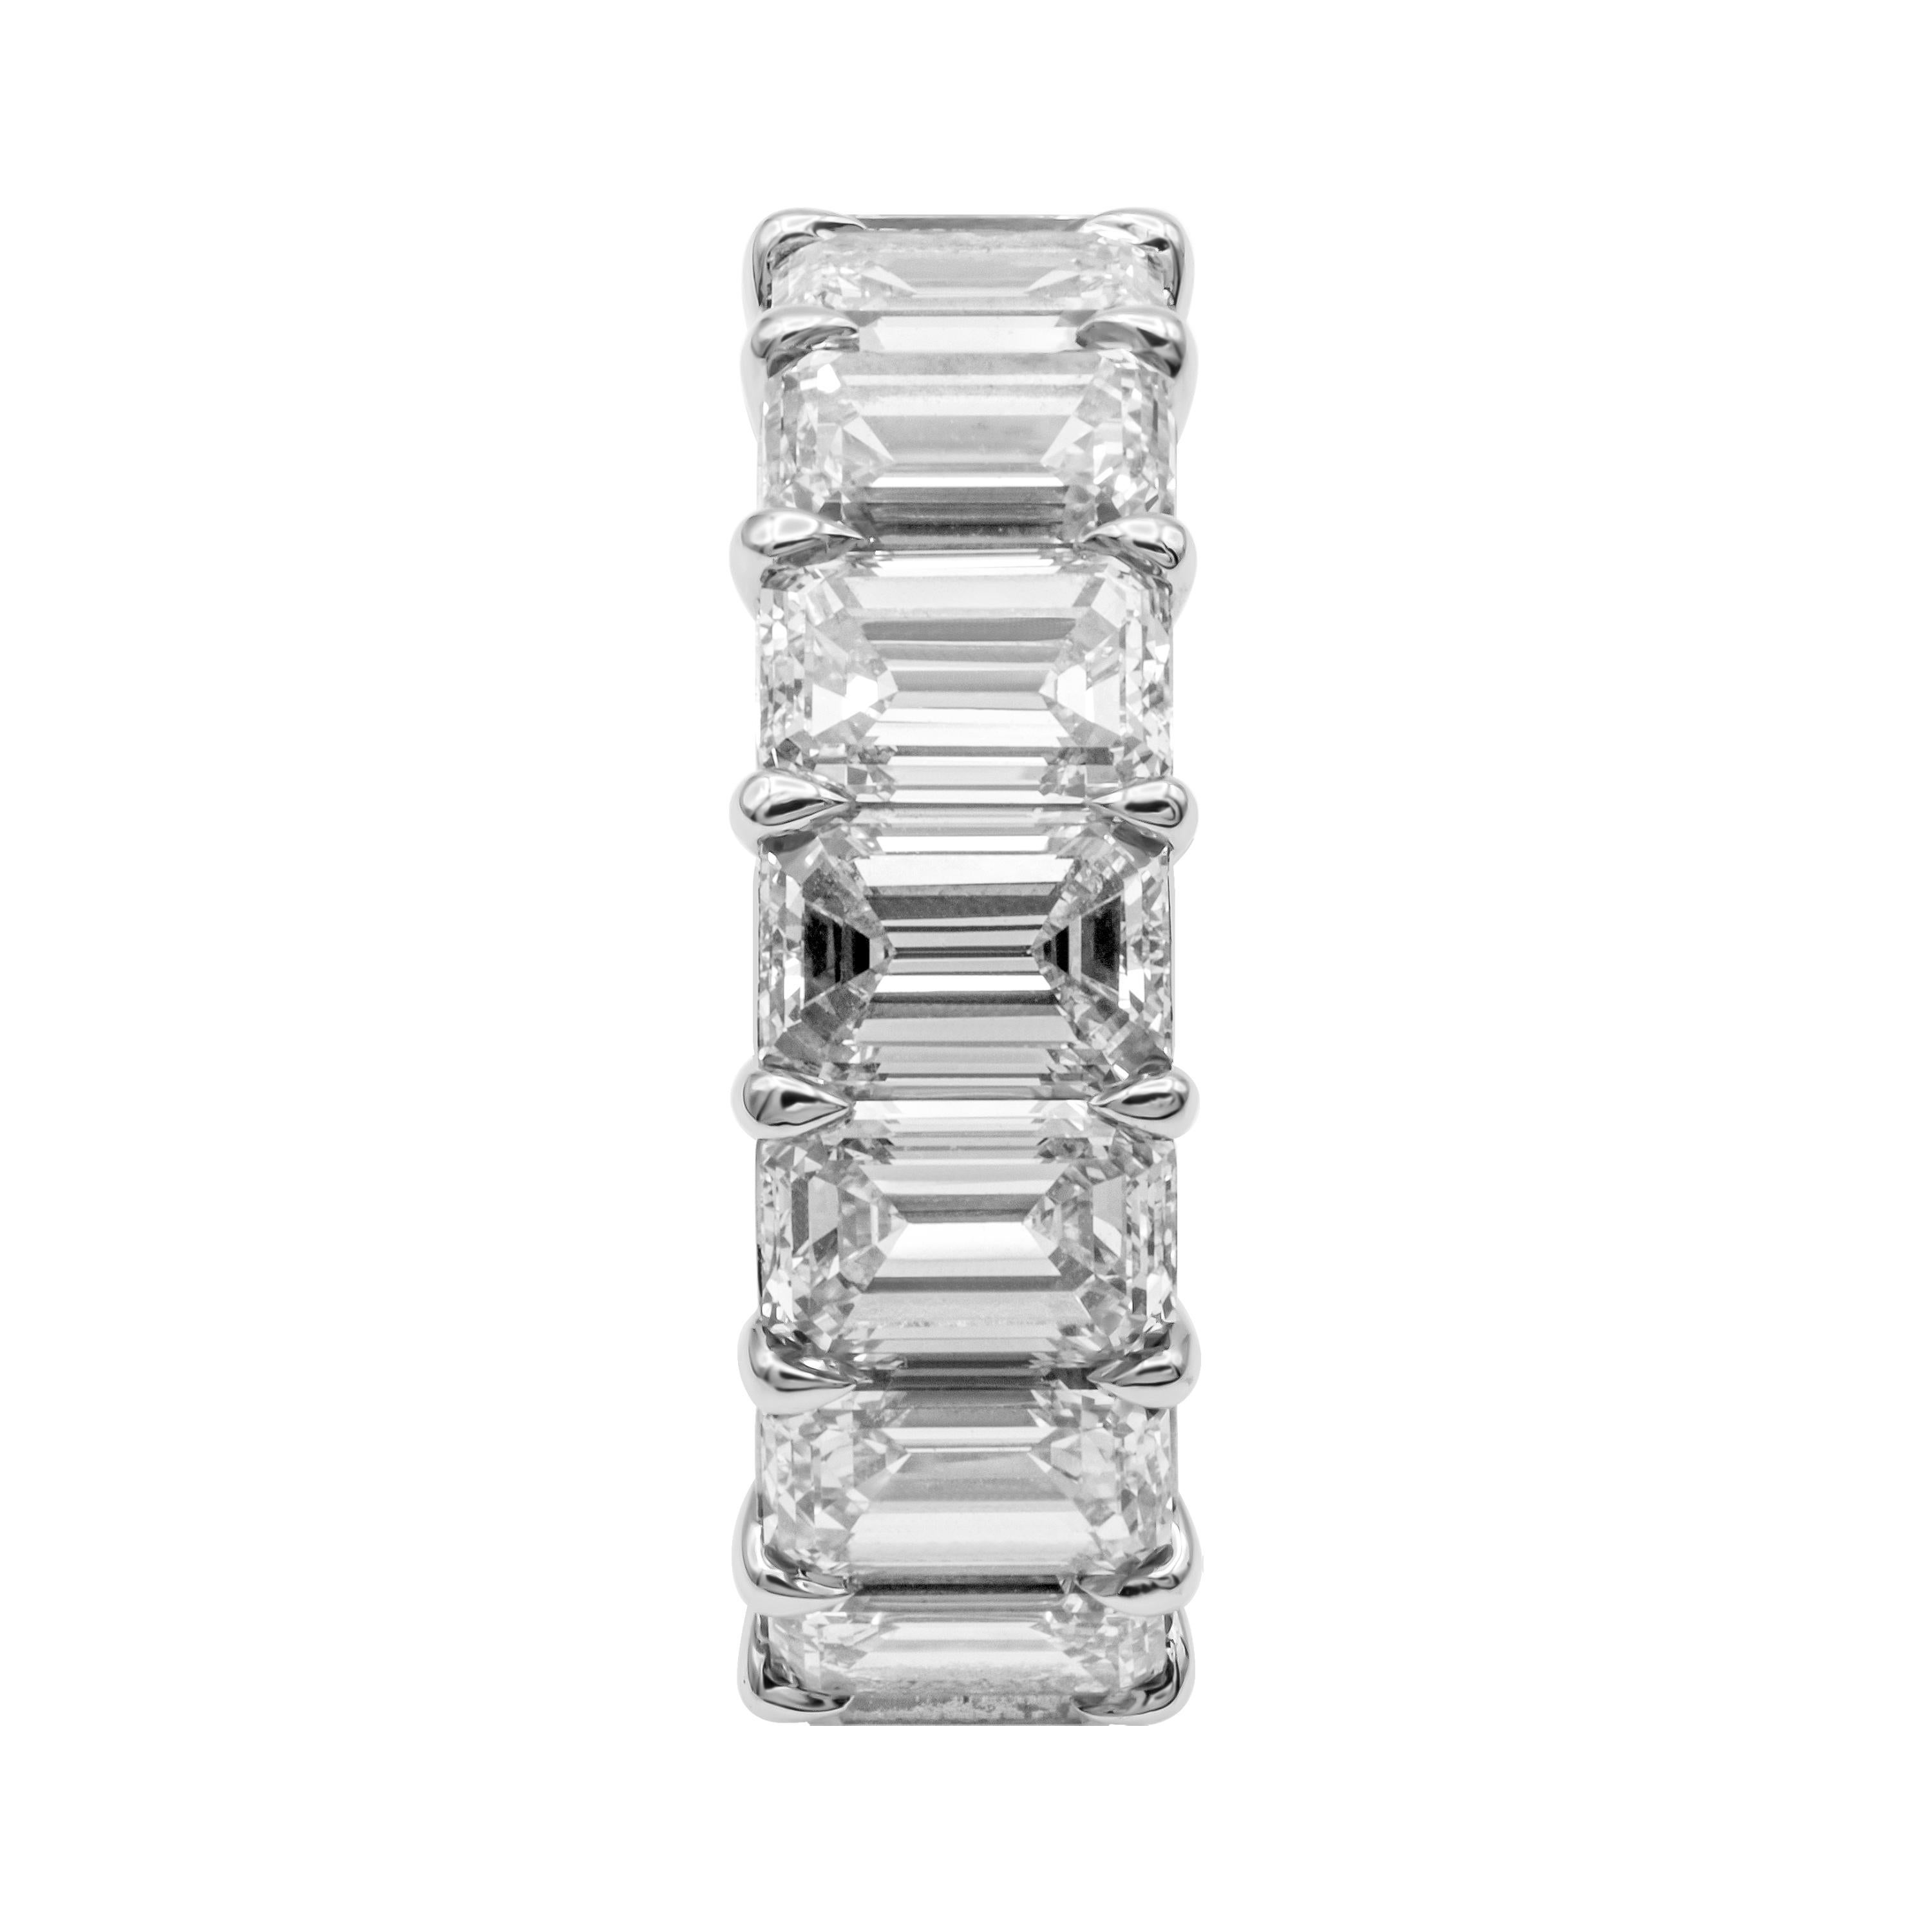 The most wanted piece of jewelry in 2020, timeless, edgy and stylish
Handcrafted Band , the highest quality of mounting you will find! Delicate yet sturdy 
Mounted in Platinum 950, 19 emerald cut diamonds totaling 9.14ct total, 0.5ct each stone
All